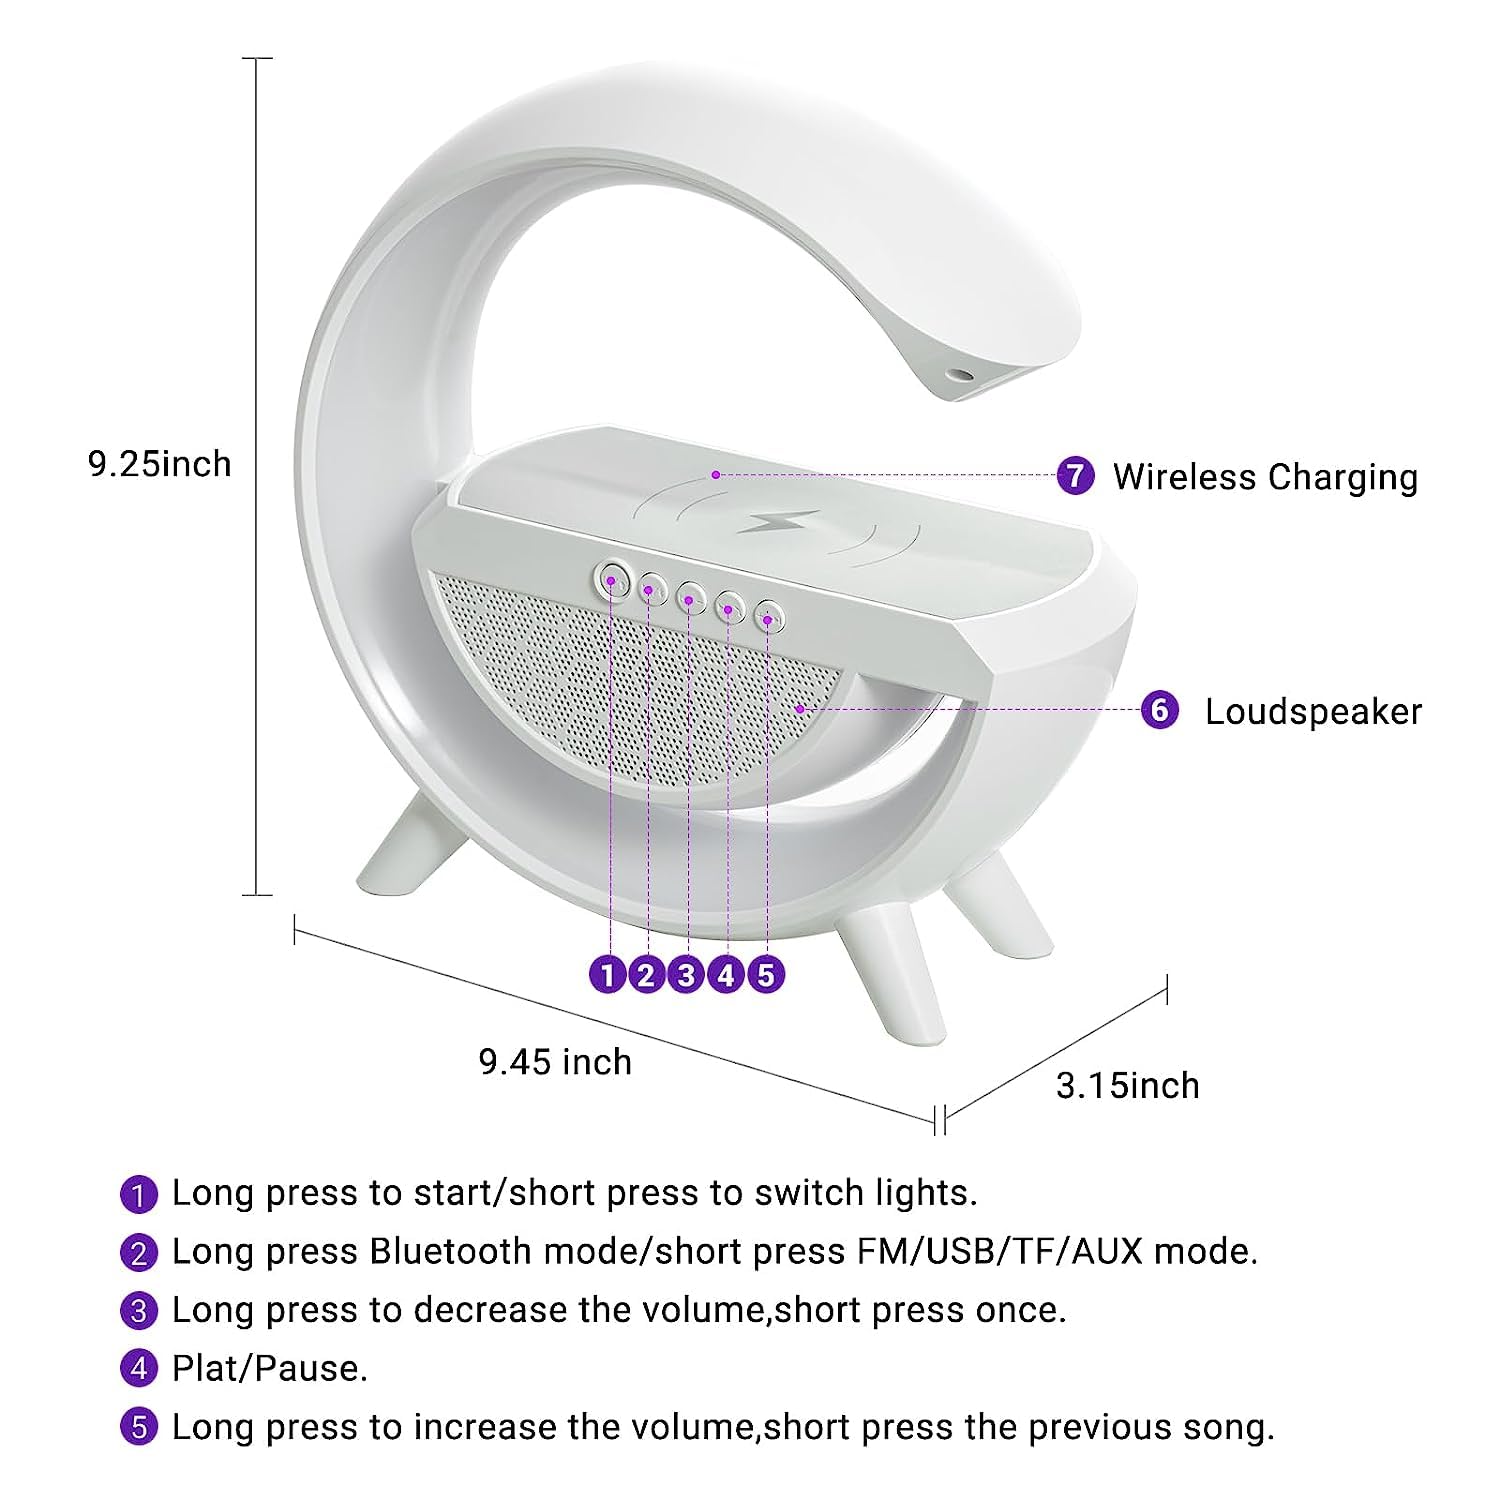 1393   3-in-1 Multi-Function LED Night Lamp with Bluetooth Speaker, Wireless Charging, for Bedroom for Music, Party and Mood Lighting - Perfect Gift for All Occasions